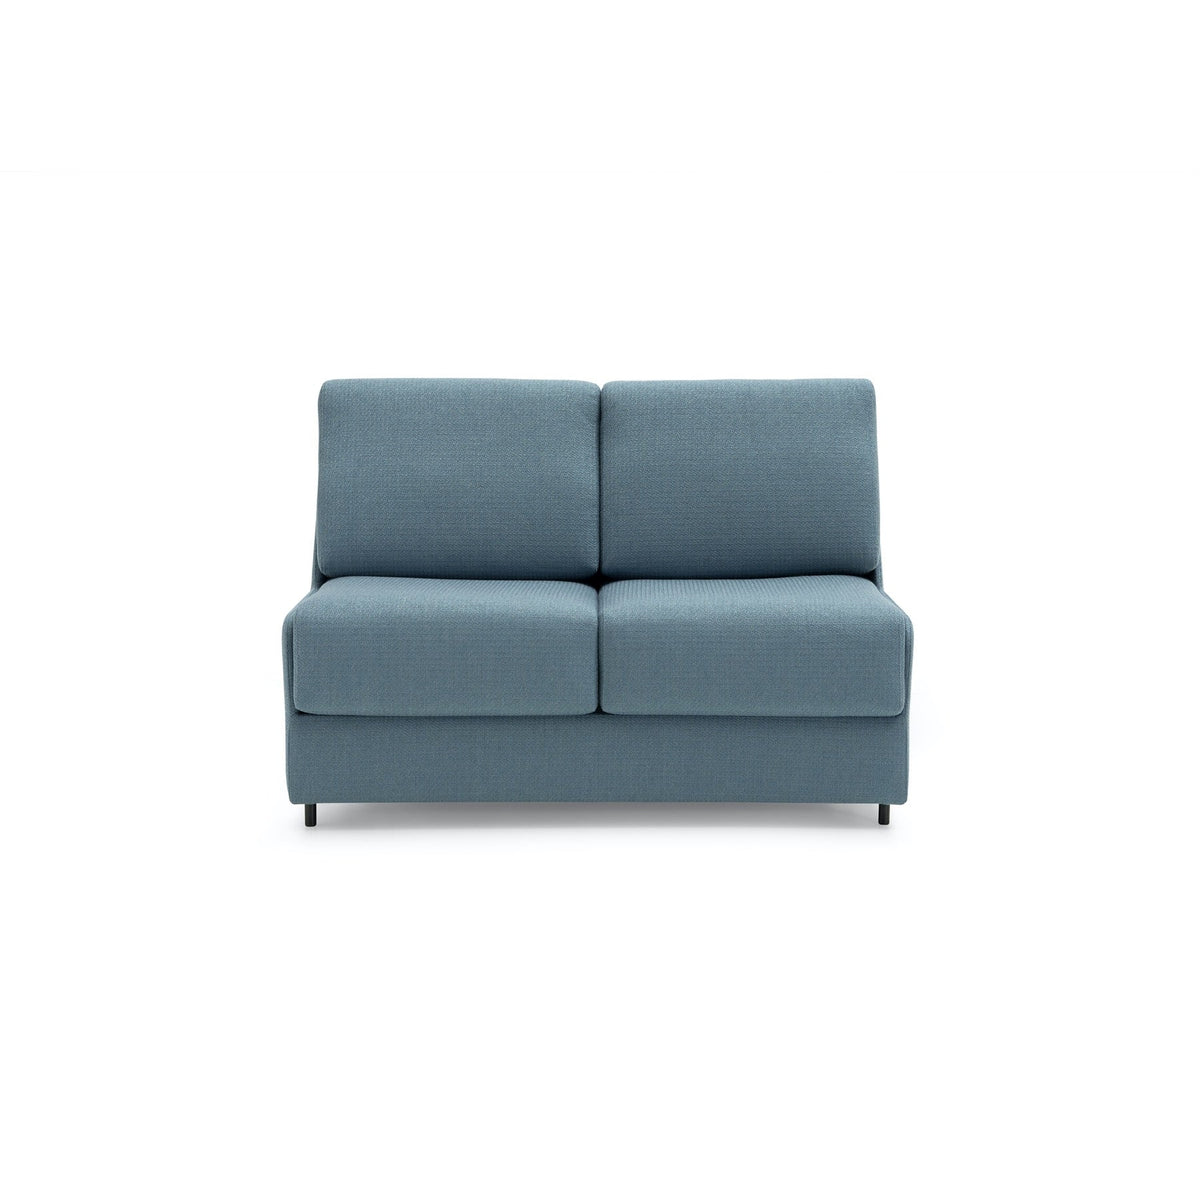 Waka 961 Sofa Bed-TM Leader-Contract Furniture Store